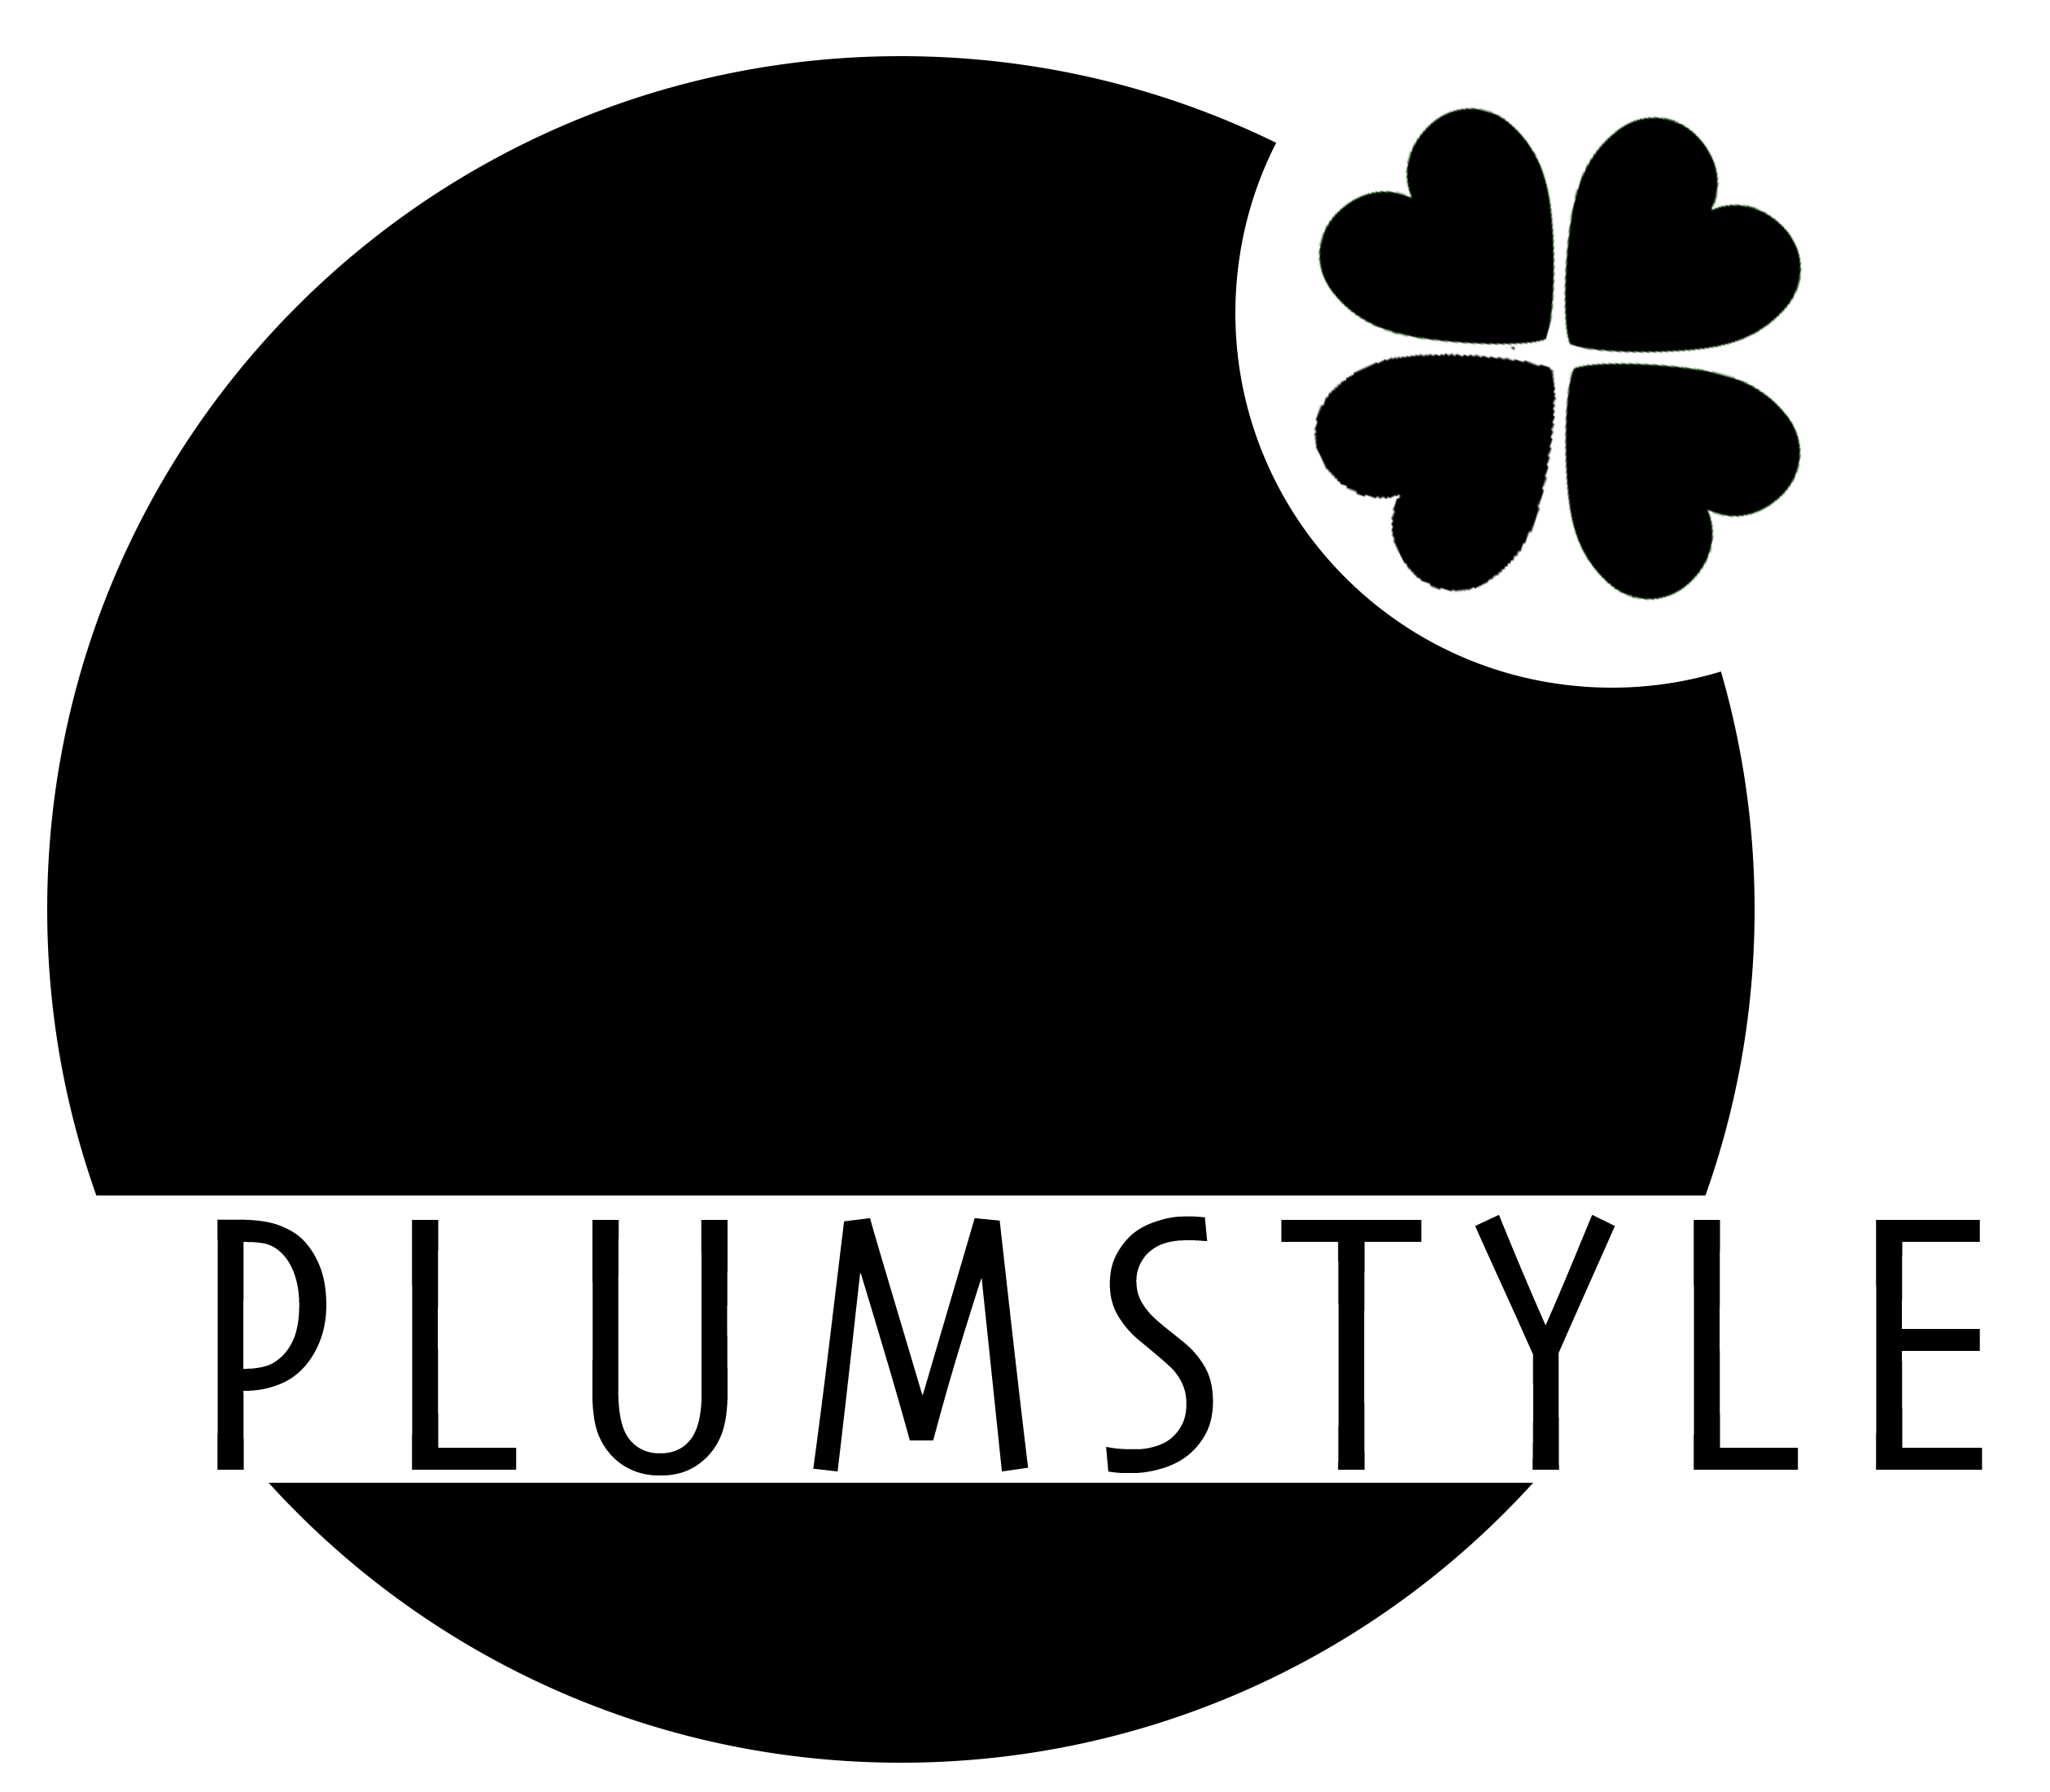 Contact Plumstyle Inc